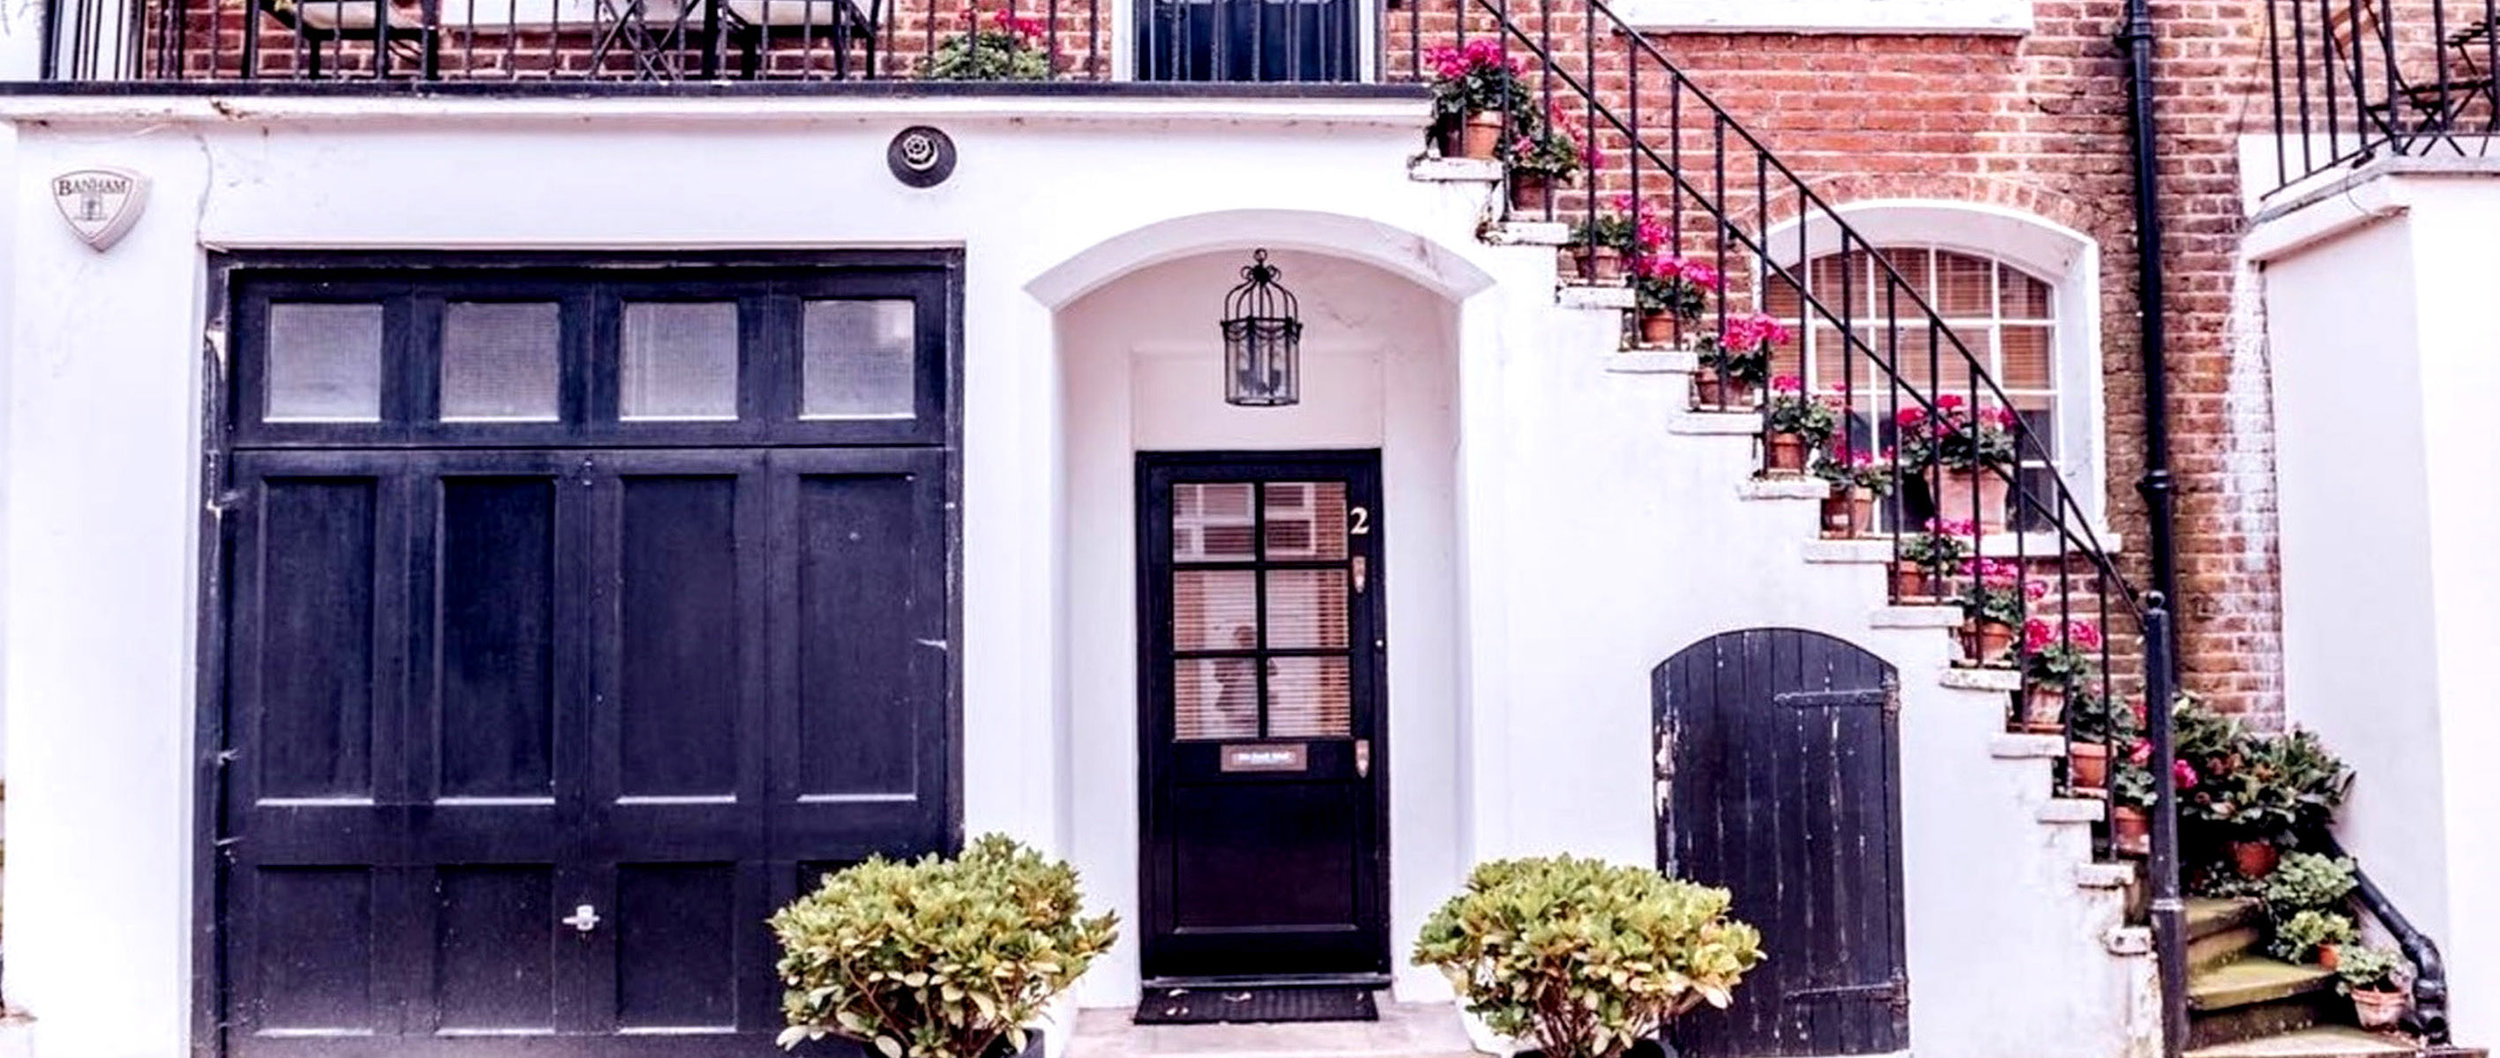 Residential property conveyancing specialists